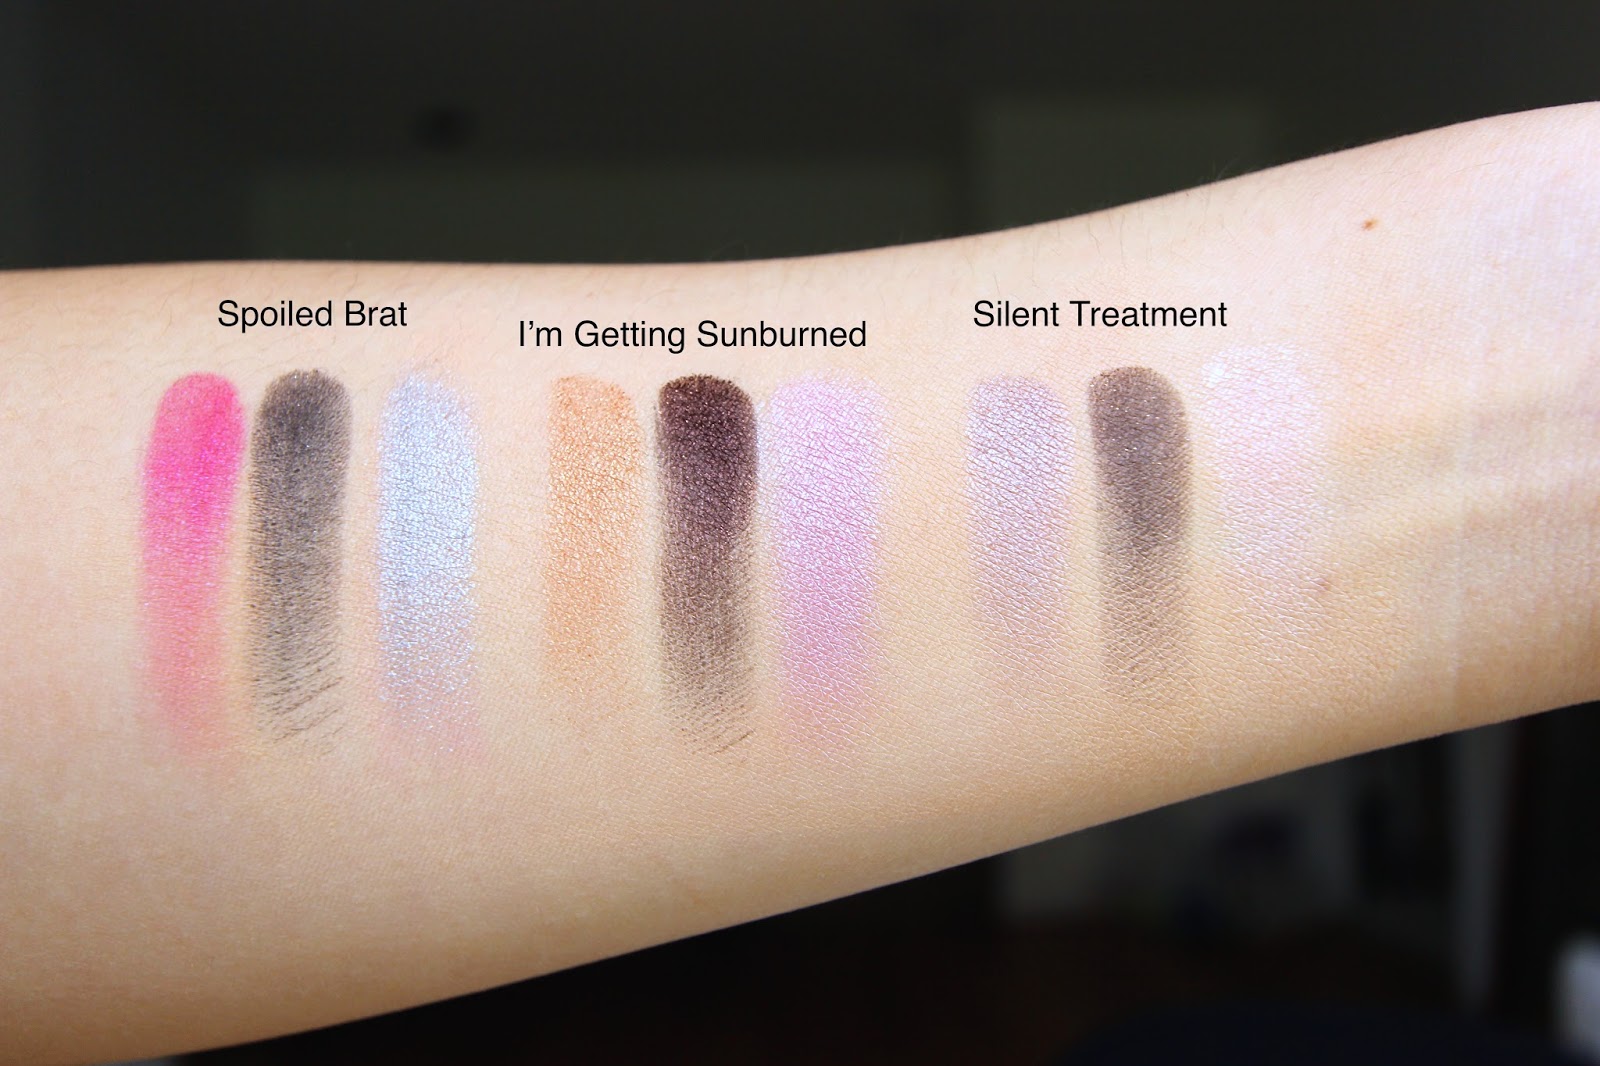 Wet n Wild Trios (Spoiled Brat, I'm Getting Sunburned, Silent Treatment) swatches and looks